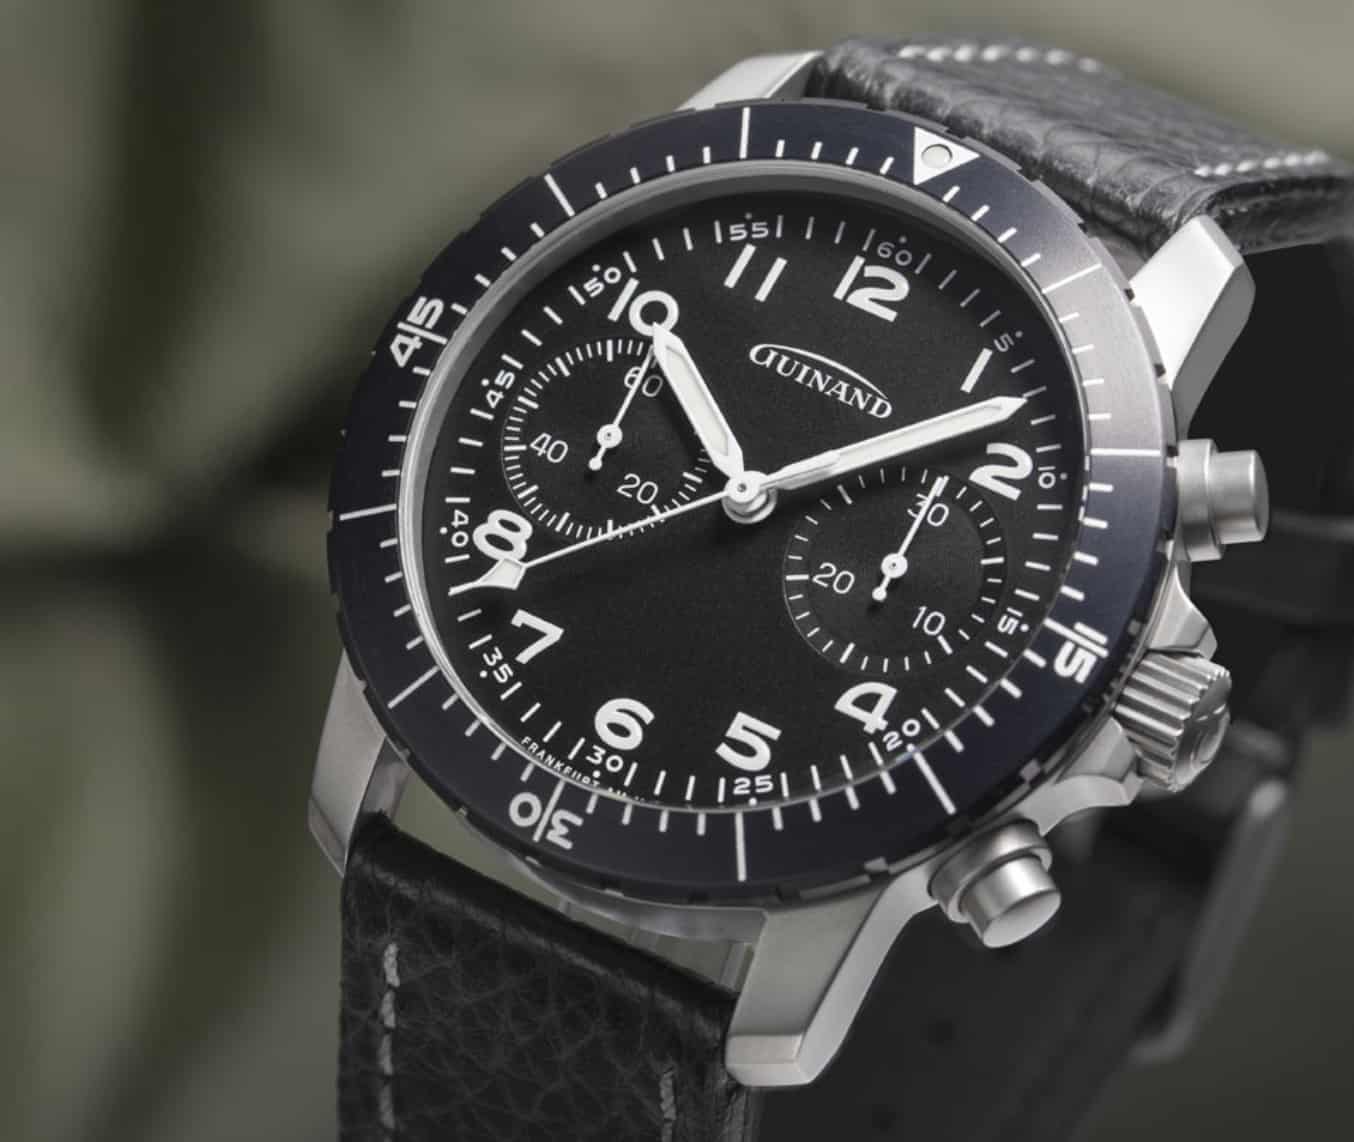 Introducing the Guinand Starfighter Pilot Chronograph